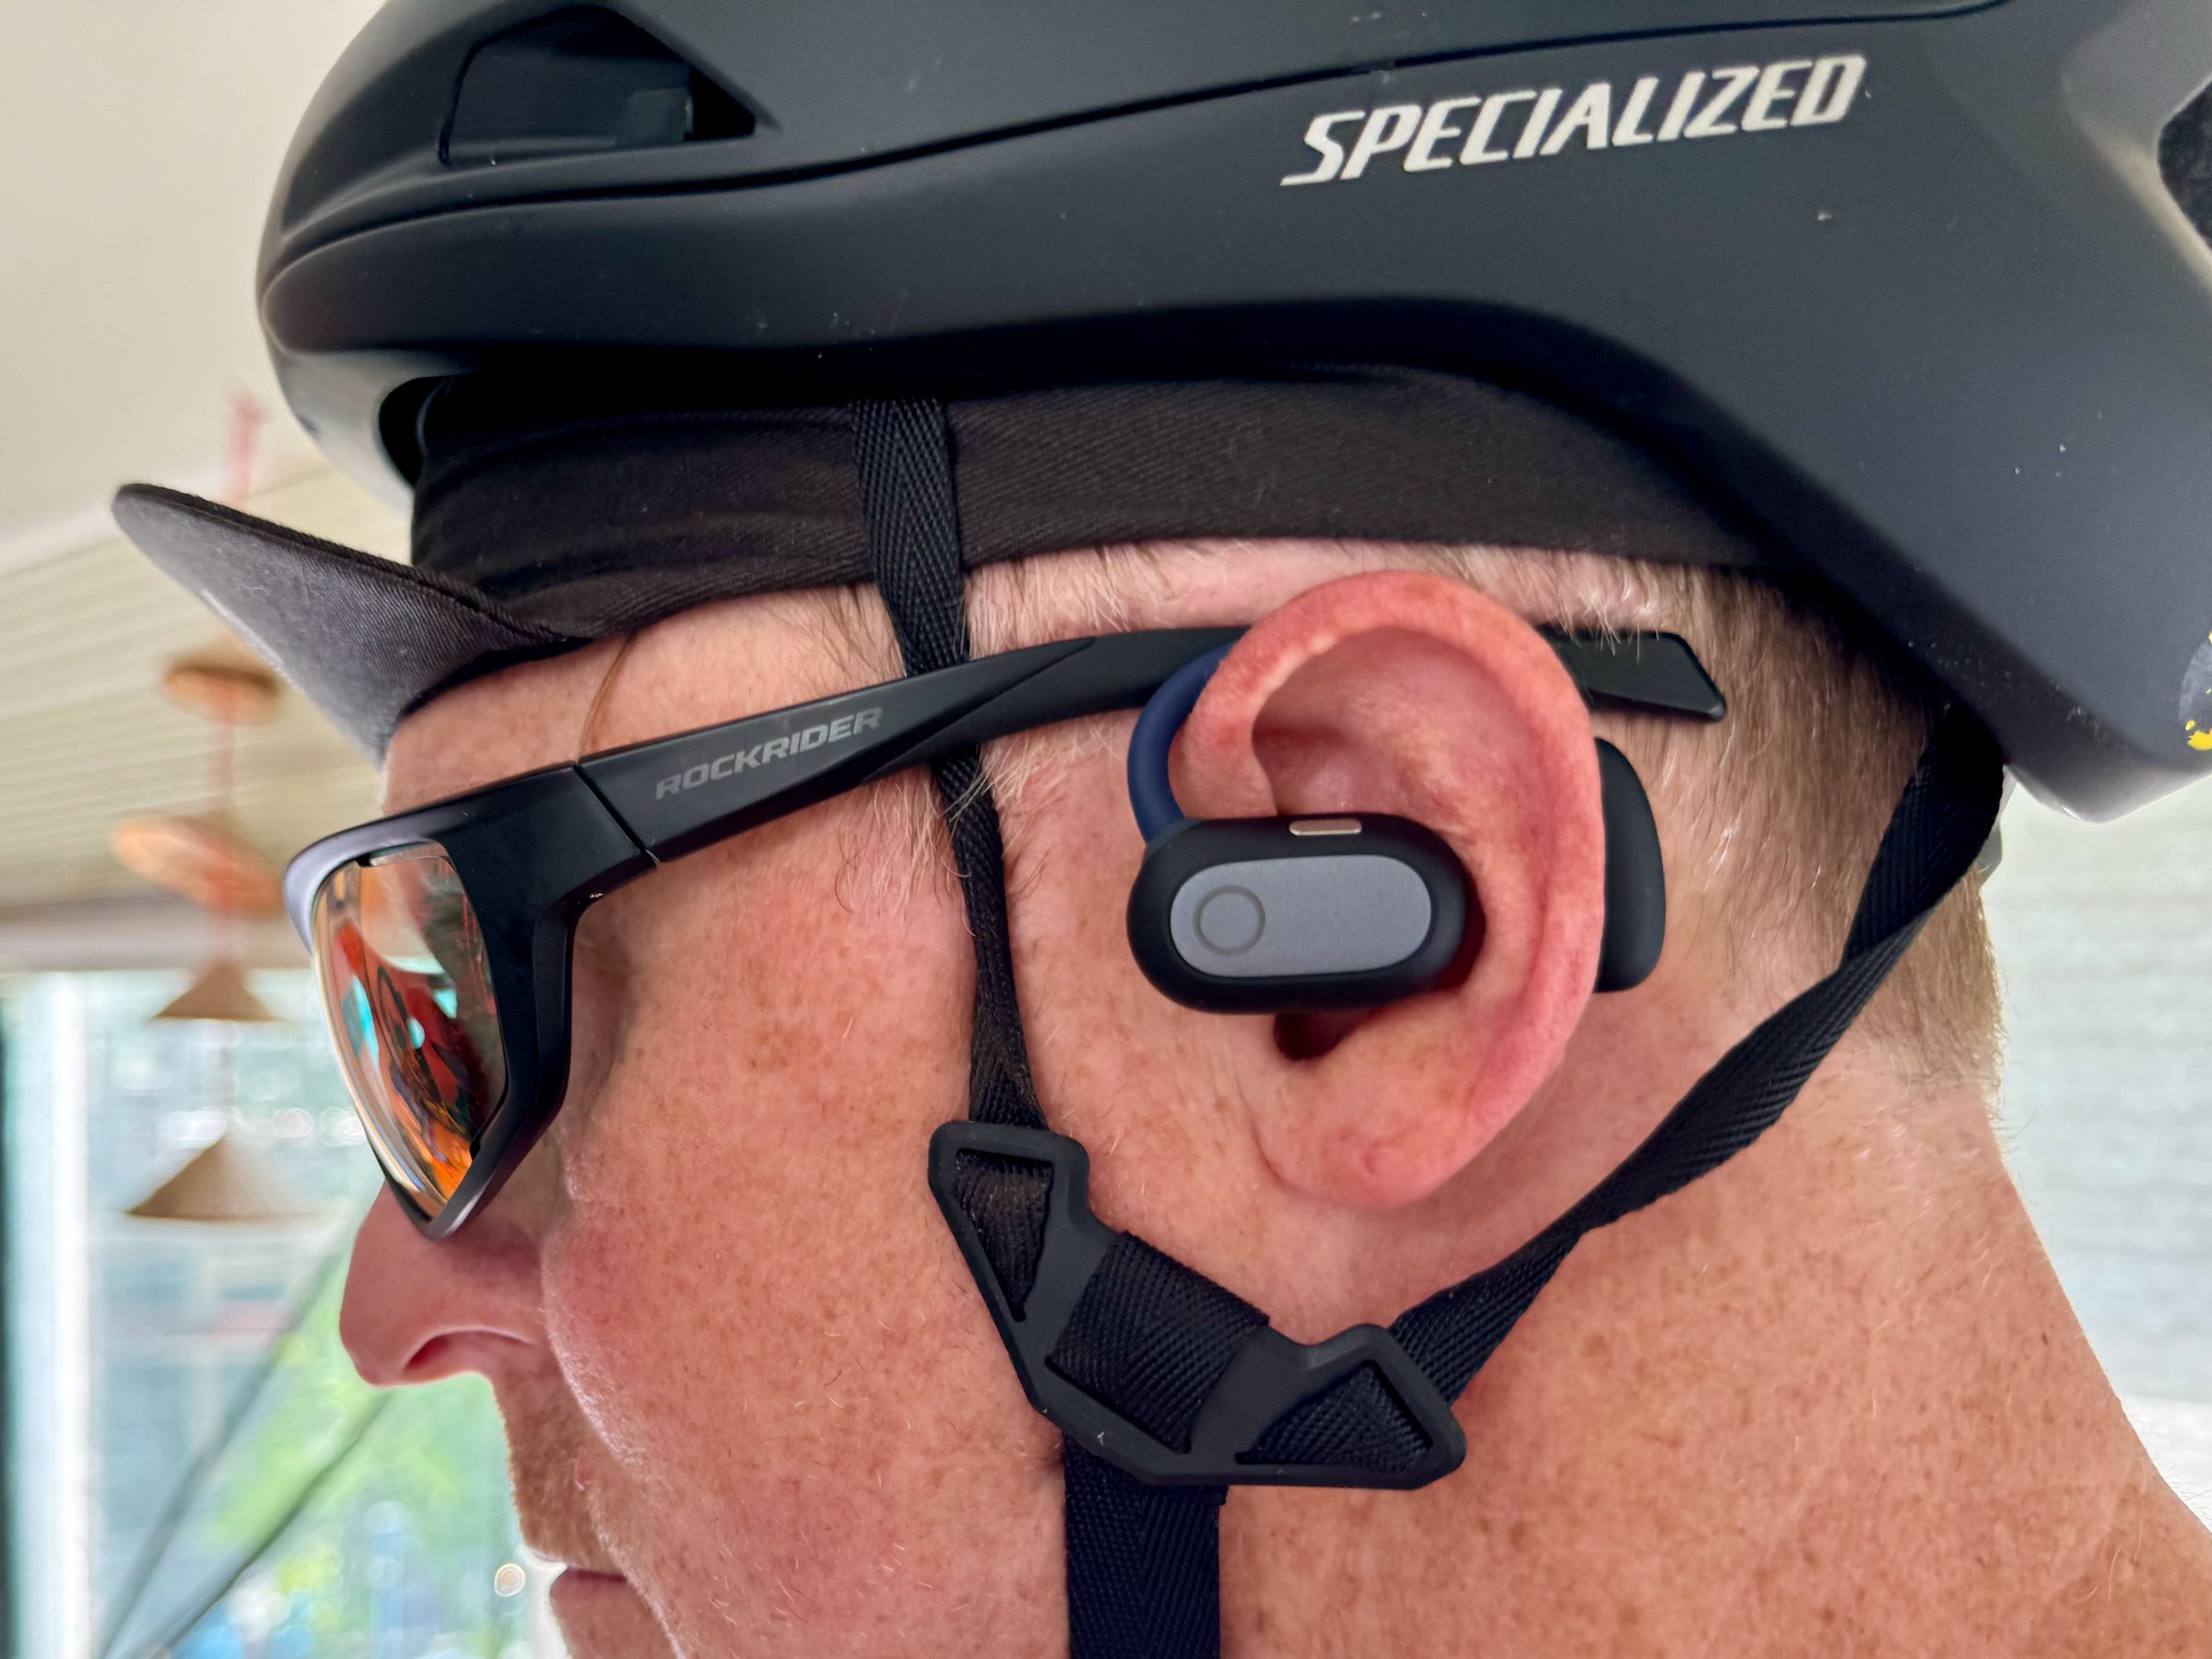 The Baseus over-the-ear slug let me hear sounds around me while also providing better quality than bone-conduction units favored by many cyclists.